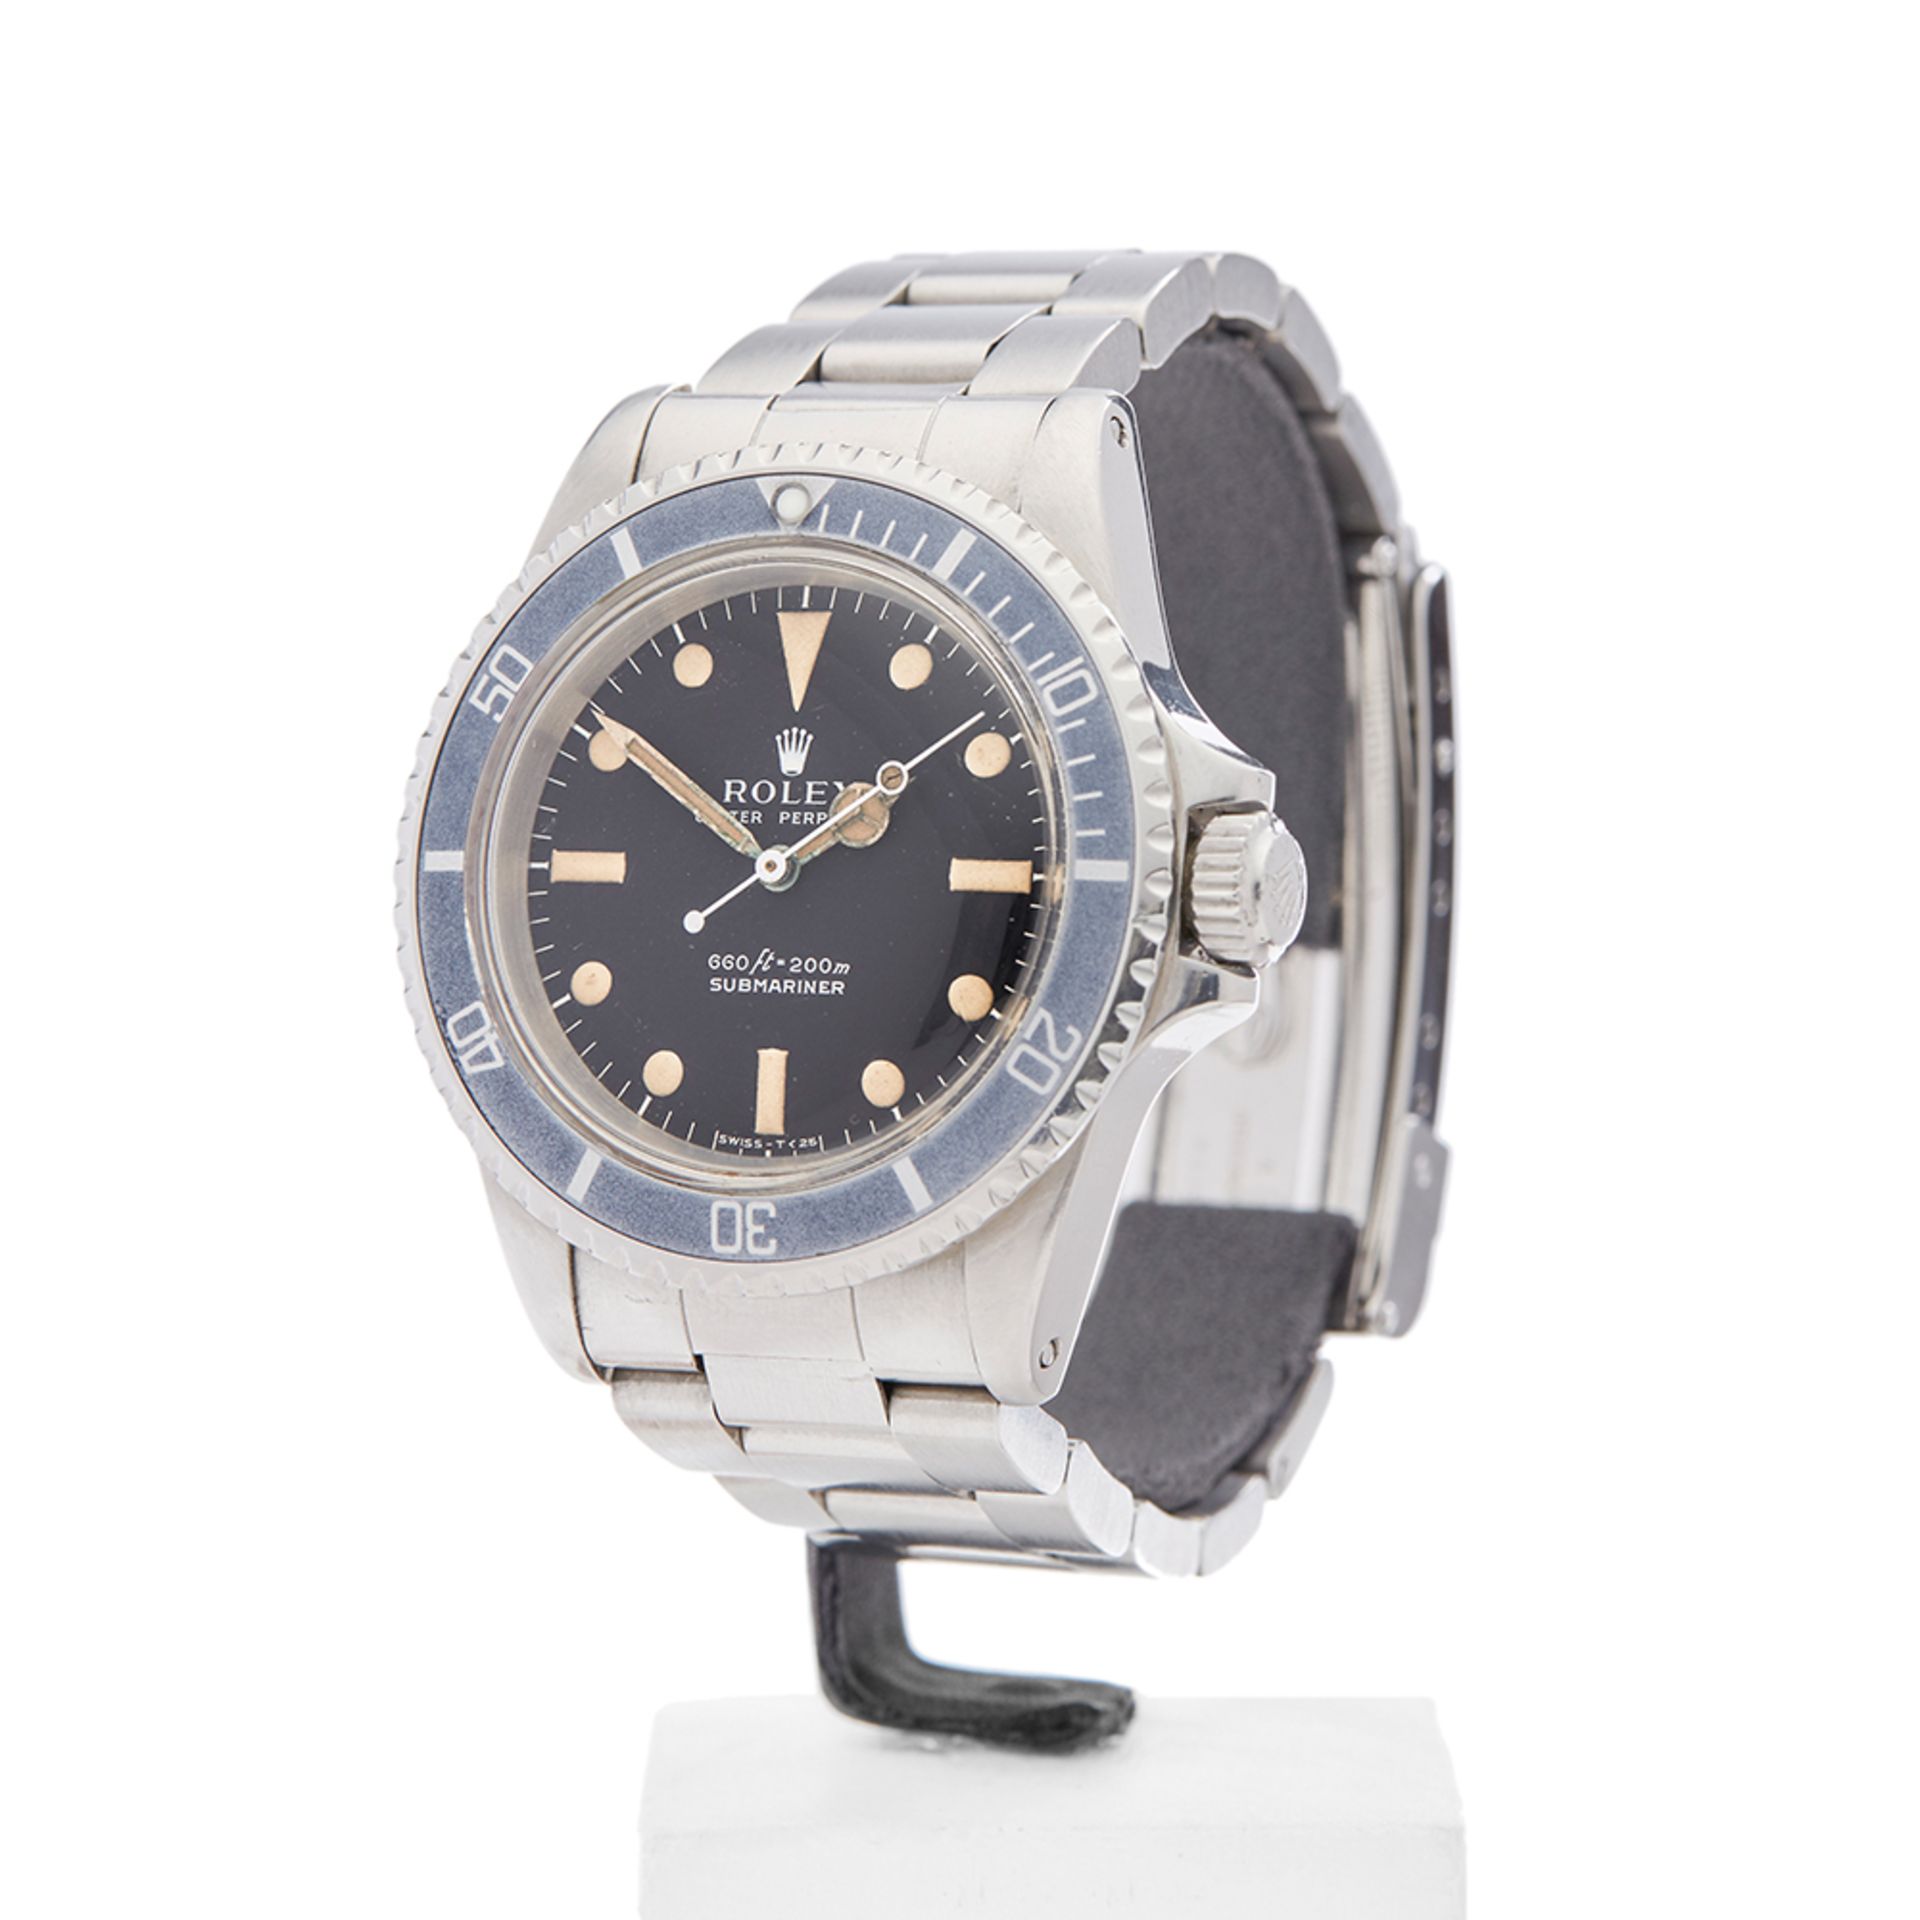 Submariner Serif Dial 40mm Stainless Steel 5513 - Image 3 of 9